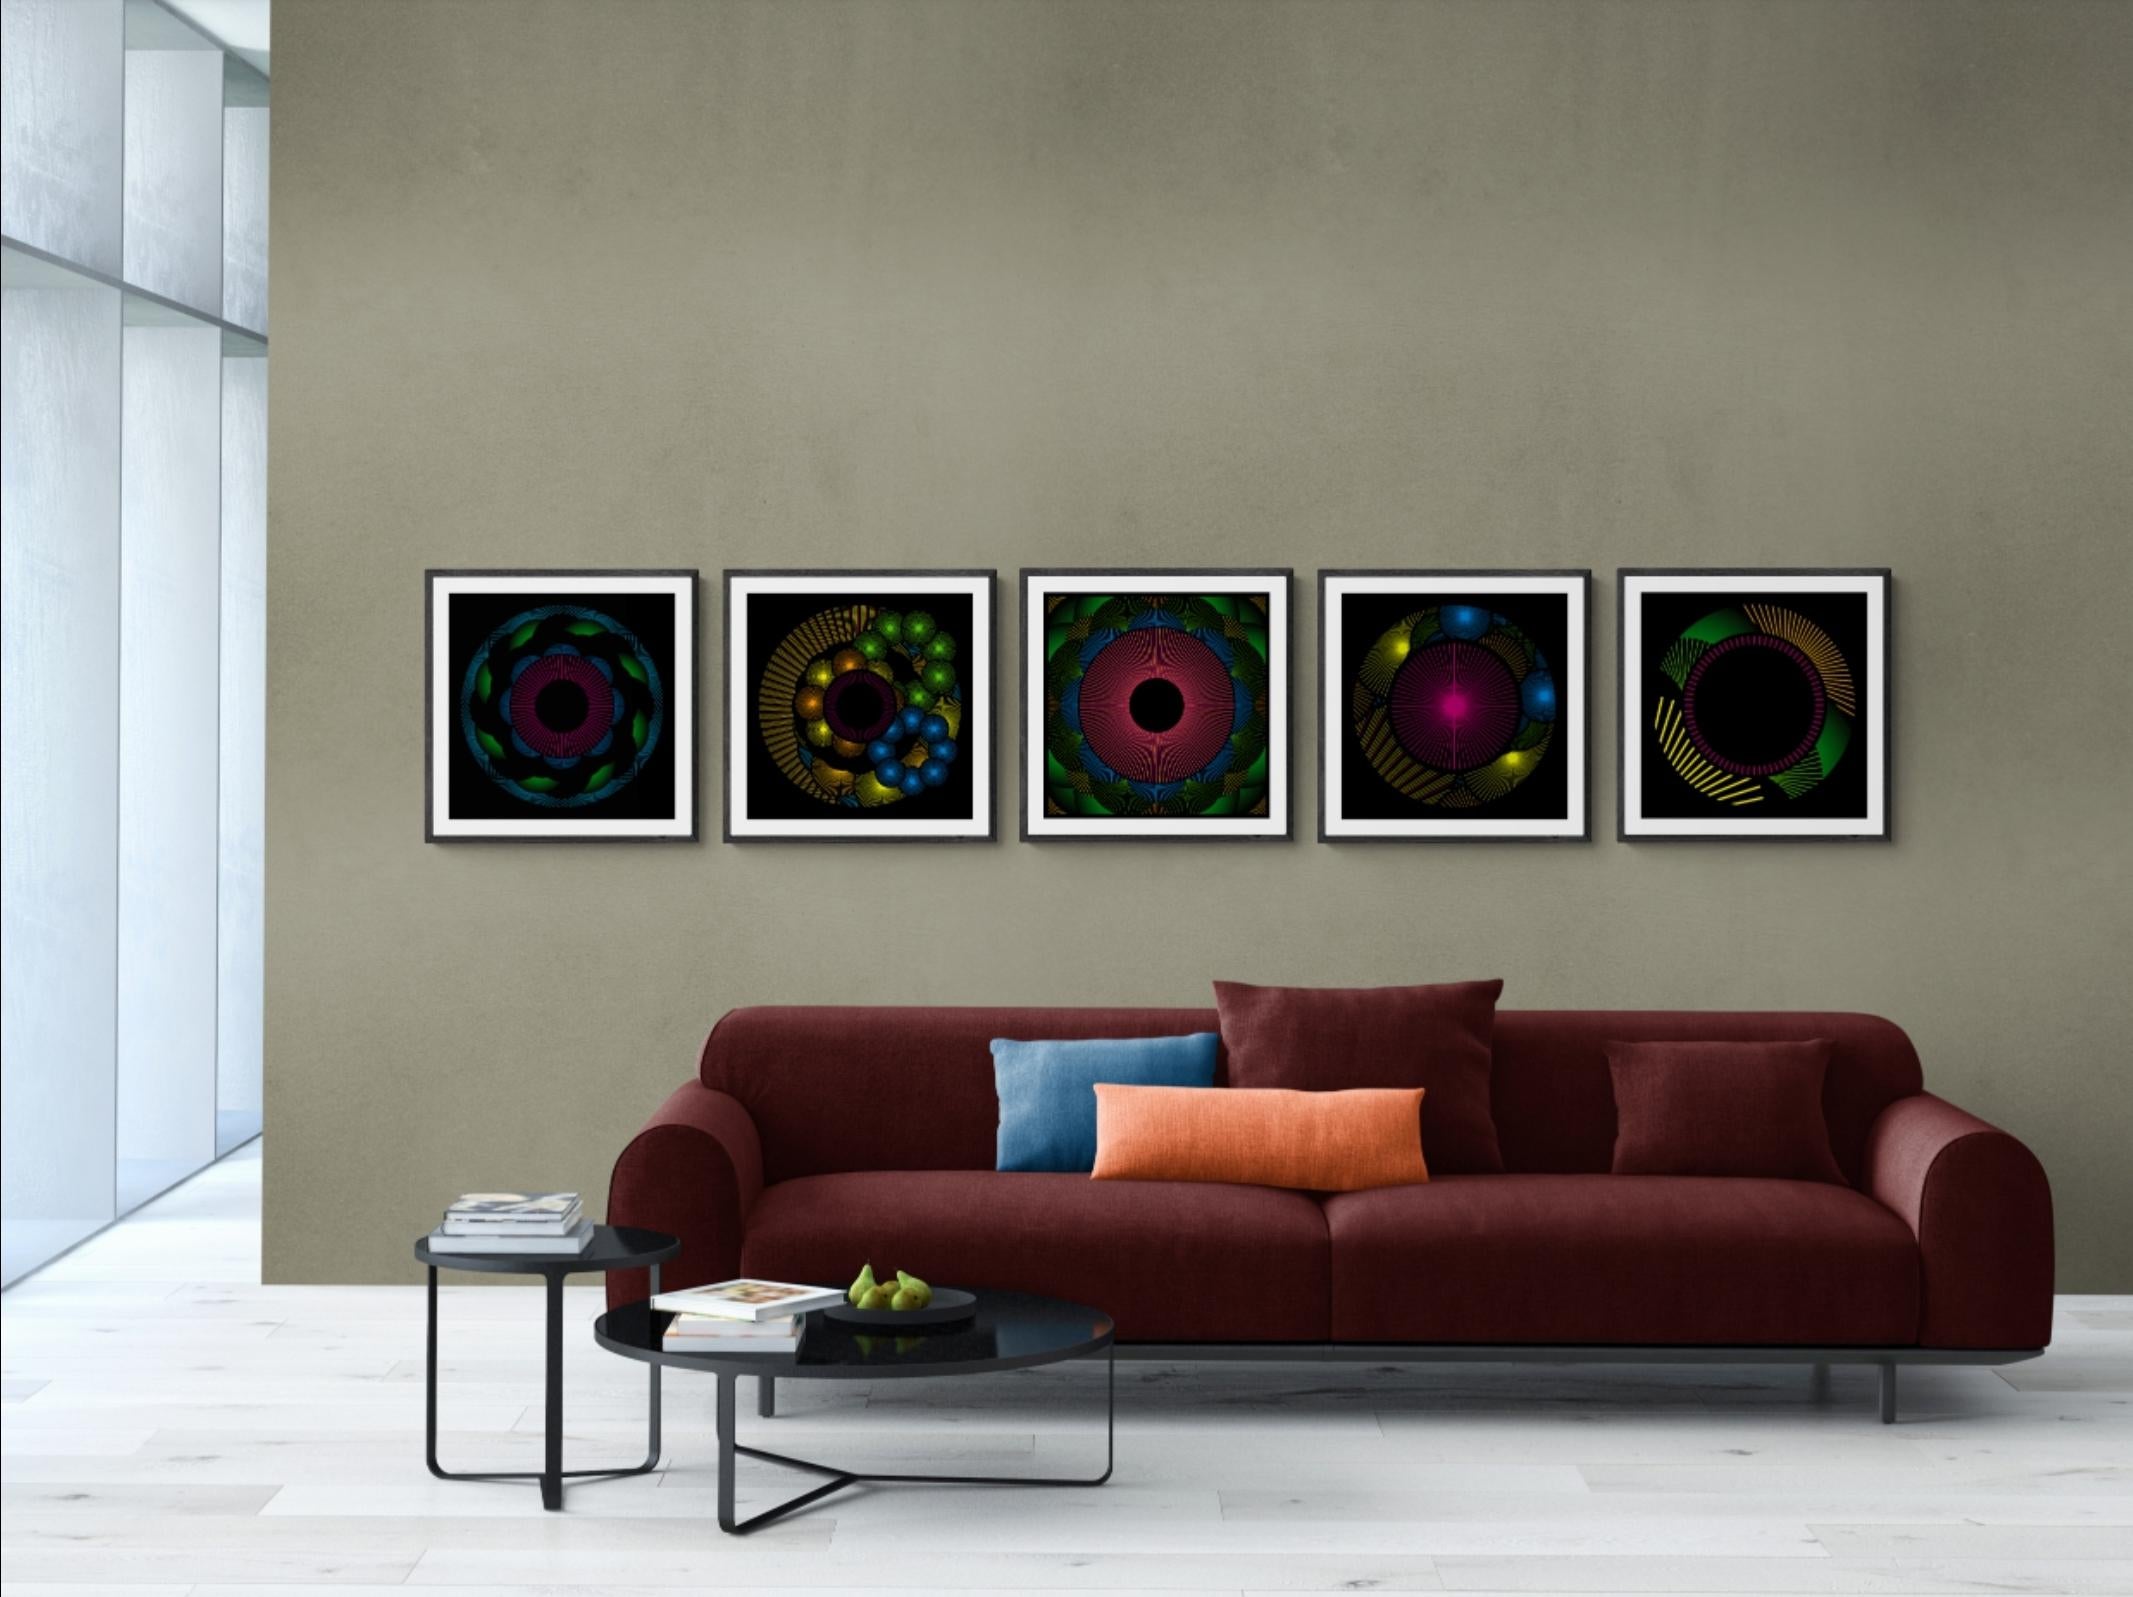 Nebulosa 34 - Black Abstract Print by Julio Campos